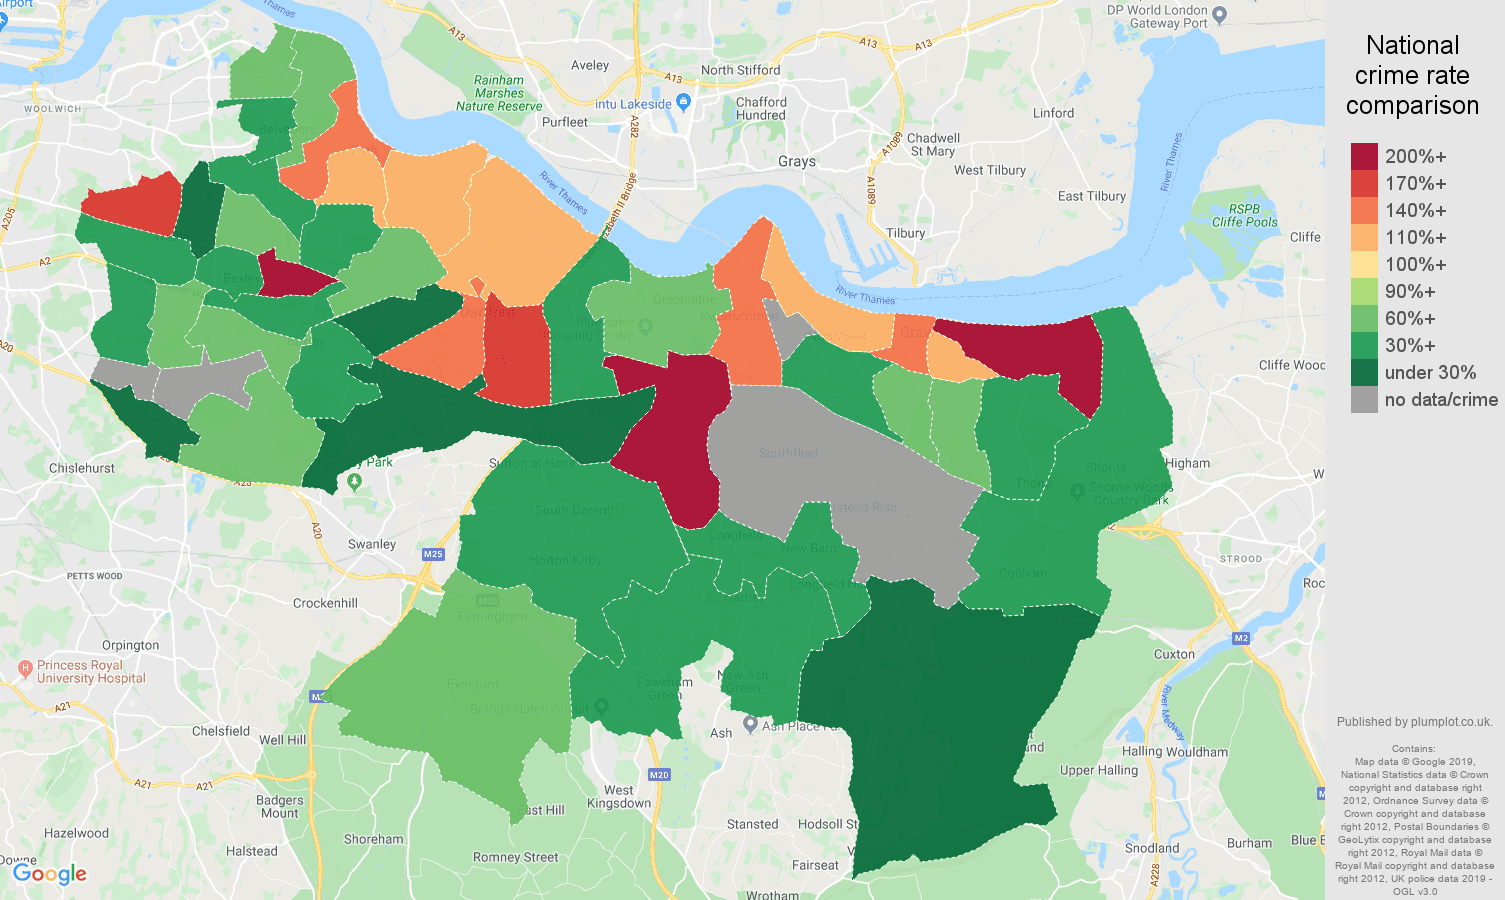 Dartford possession of weapons crime rate comparison map